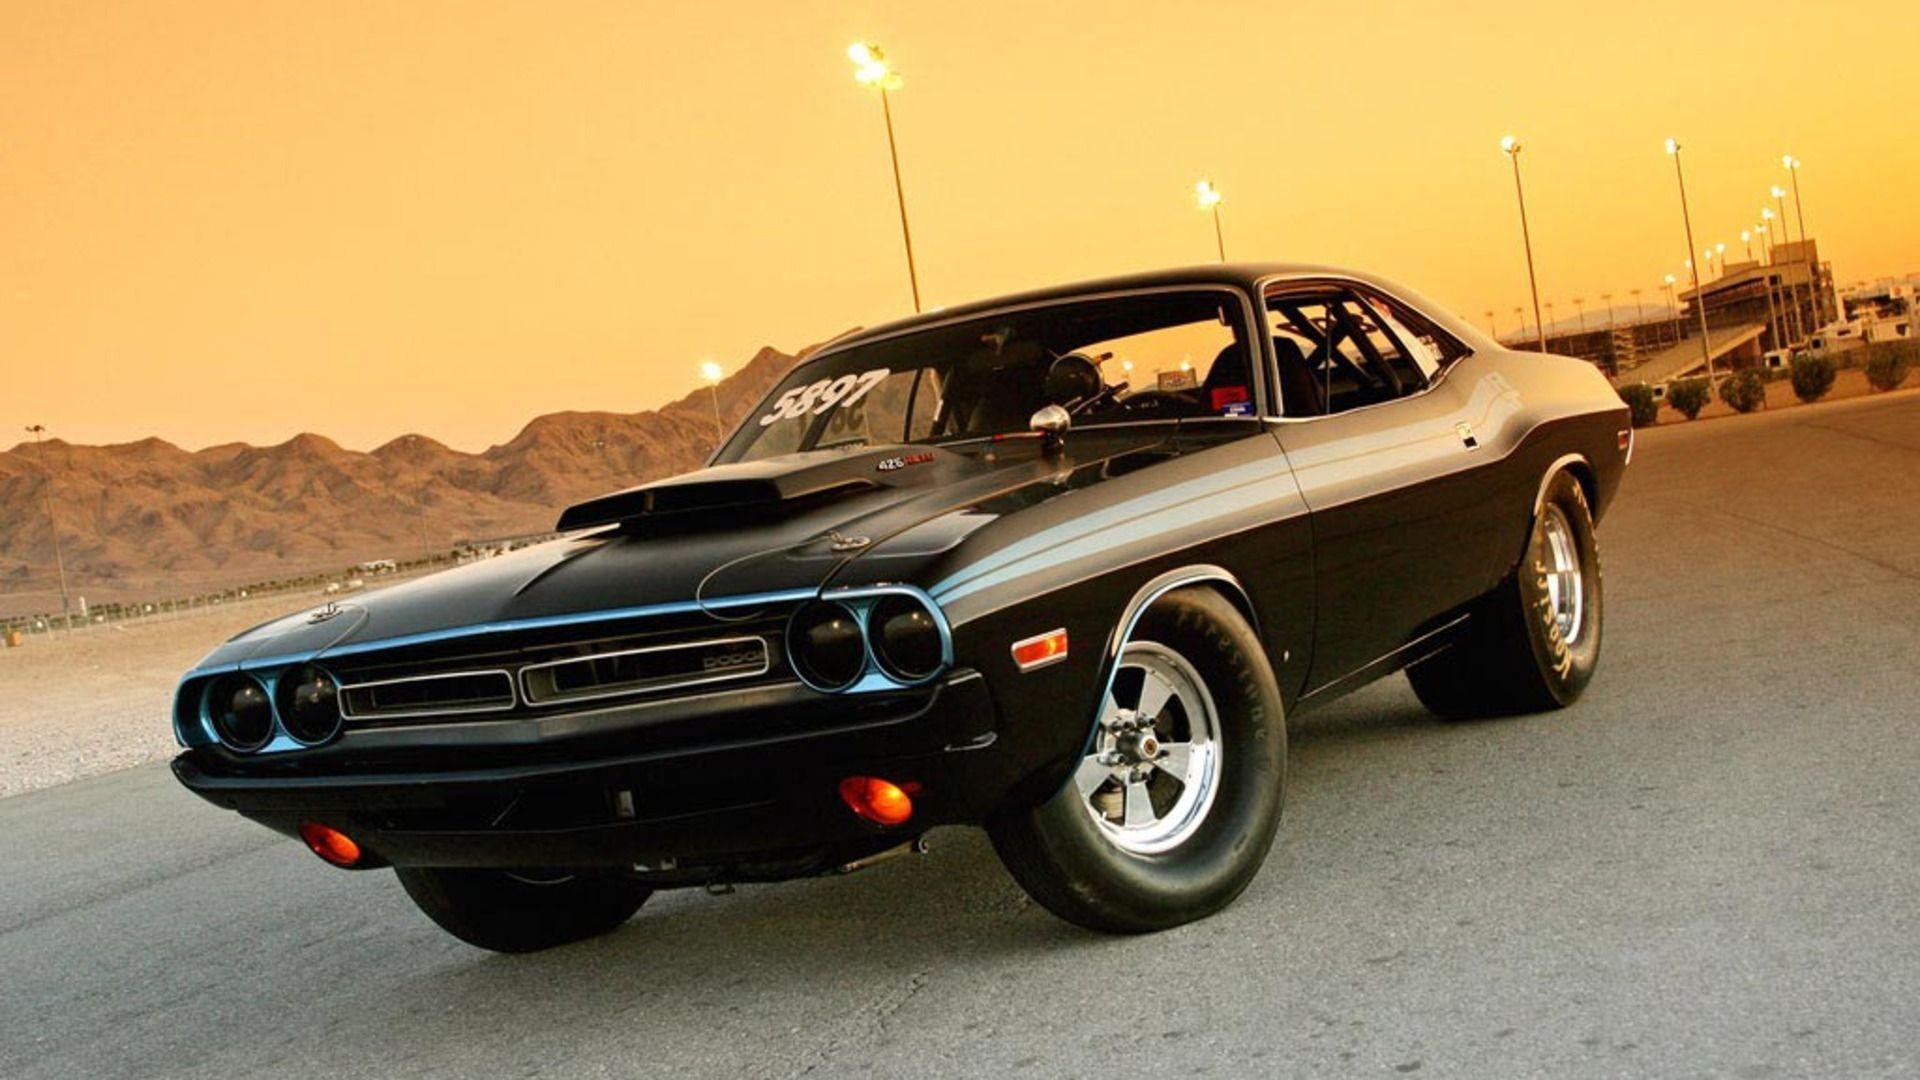 1920x1080 Muscle Cars Fast and Furious Â« Desktop Background Wallpapers HD